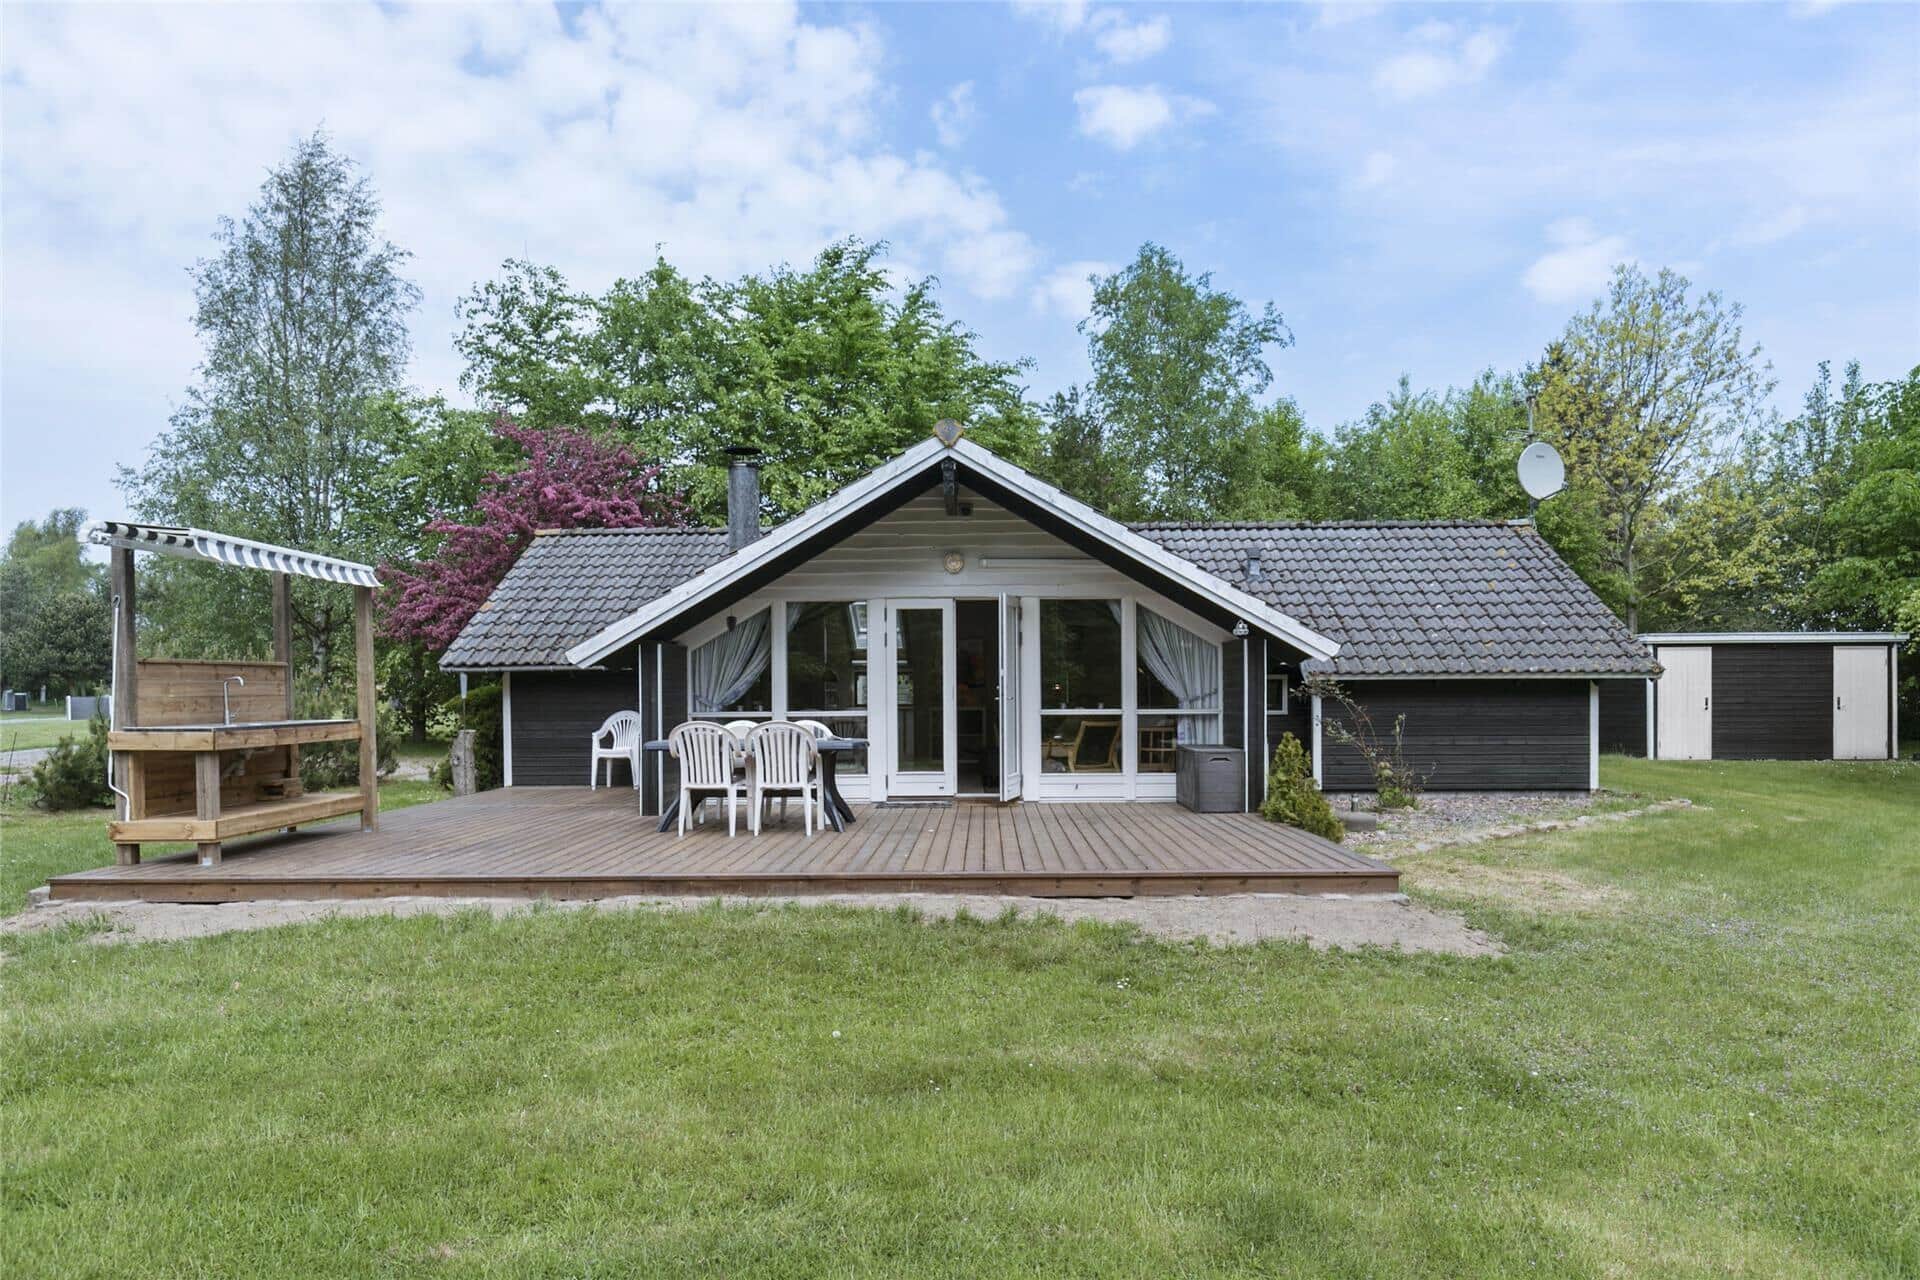 Image 0-10 Holiday-home 1578, Boesvej 7, DK - 3720 Aakirkeby